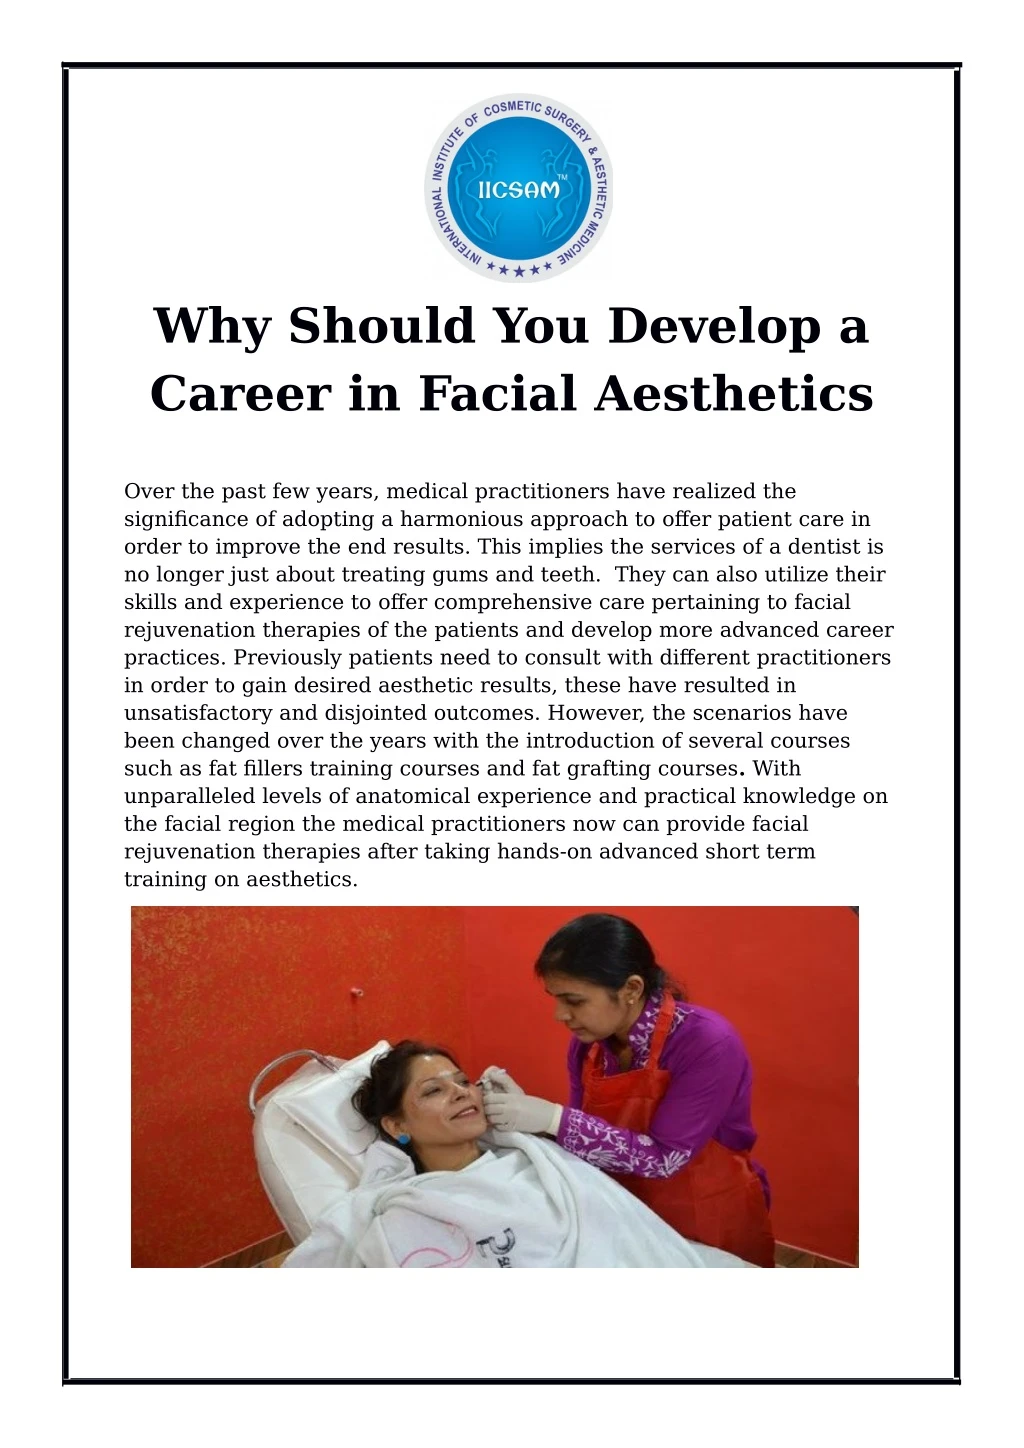 why should you develop a career in facial